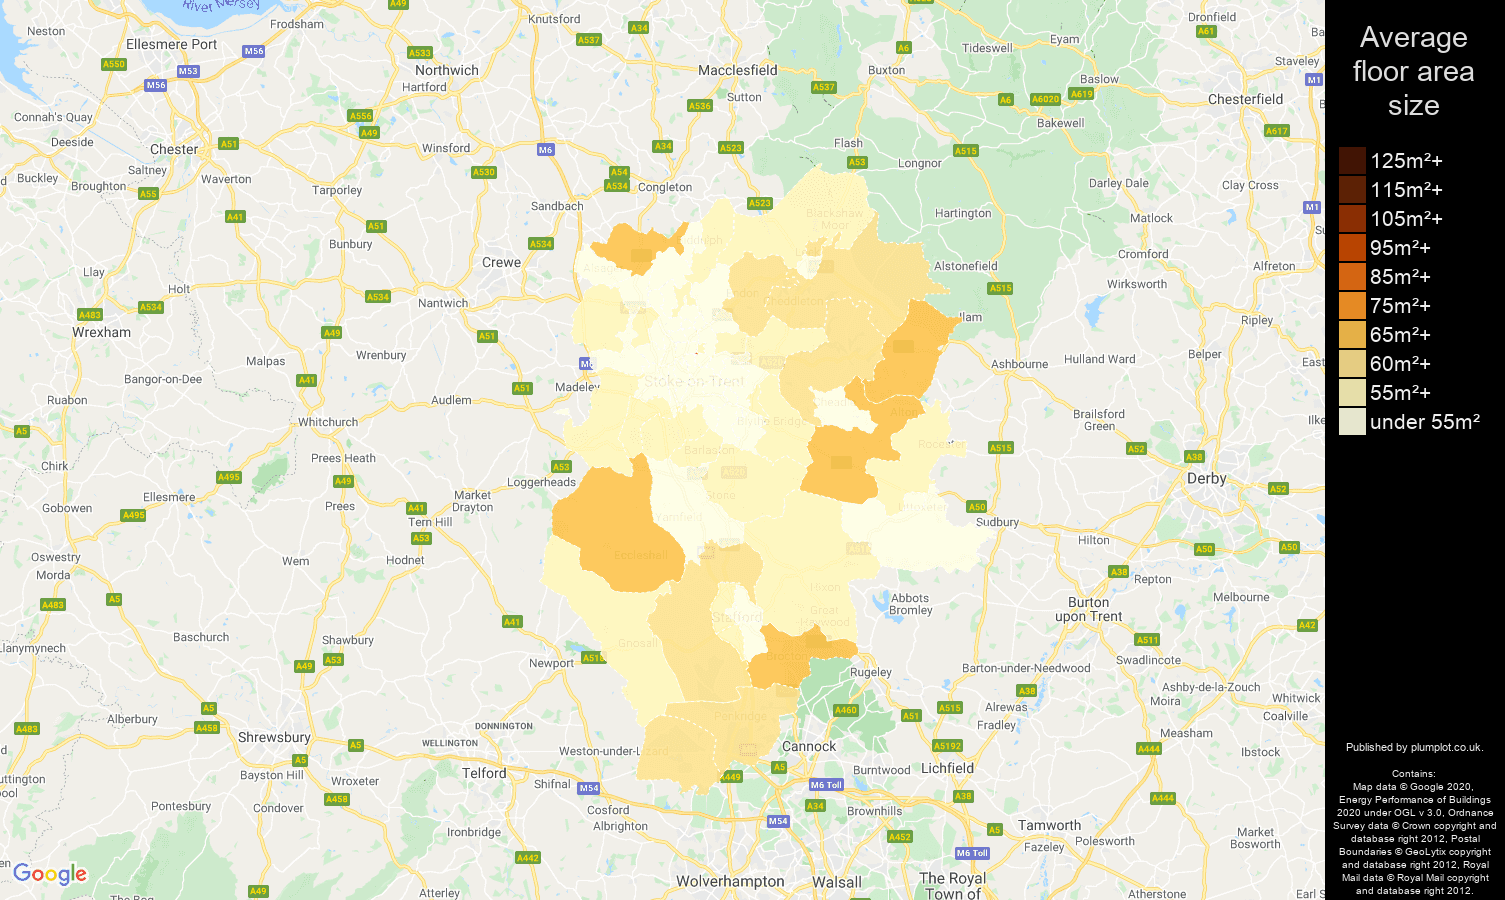 Stoke on Trent map of average floor area size of flats